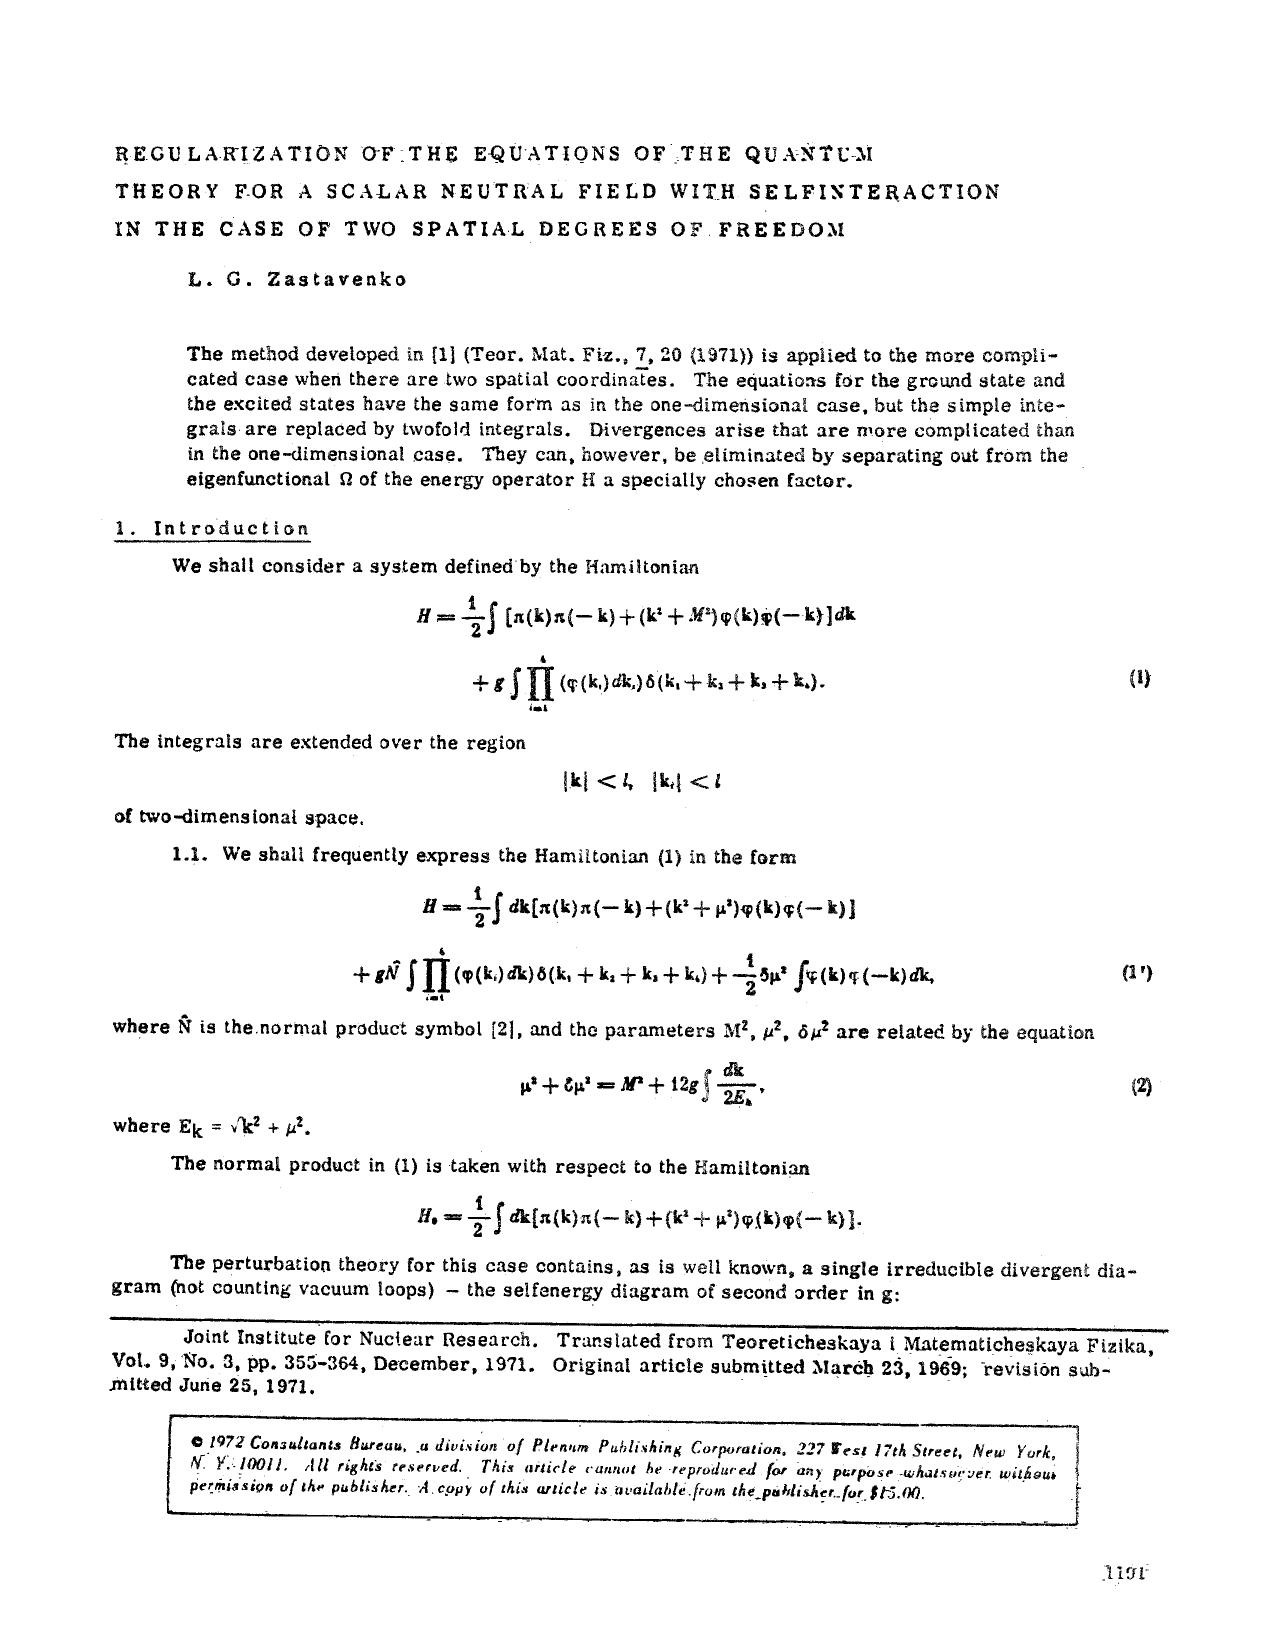 Regularization of the equations of the quantum theory for a scalar neutral field with selfinteraction in the case of two spatial degrees of freedom by Unknown